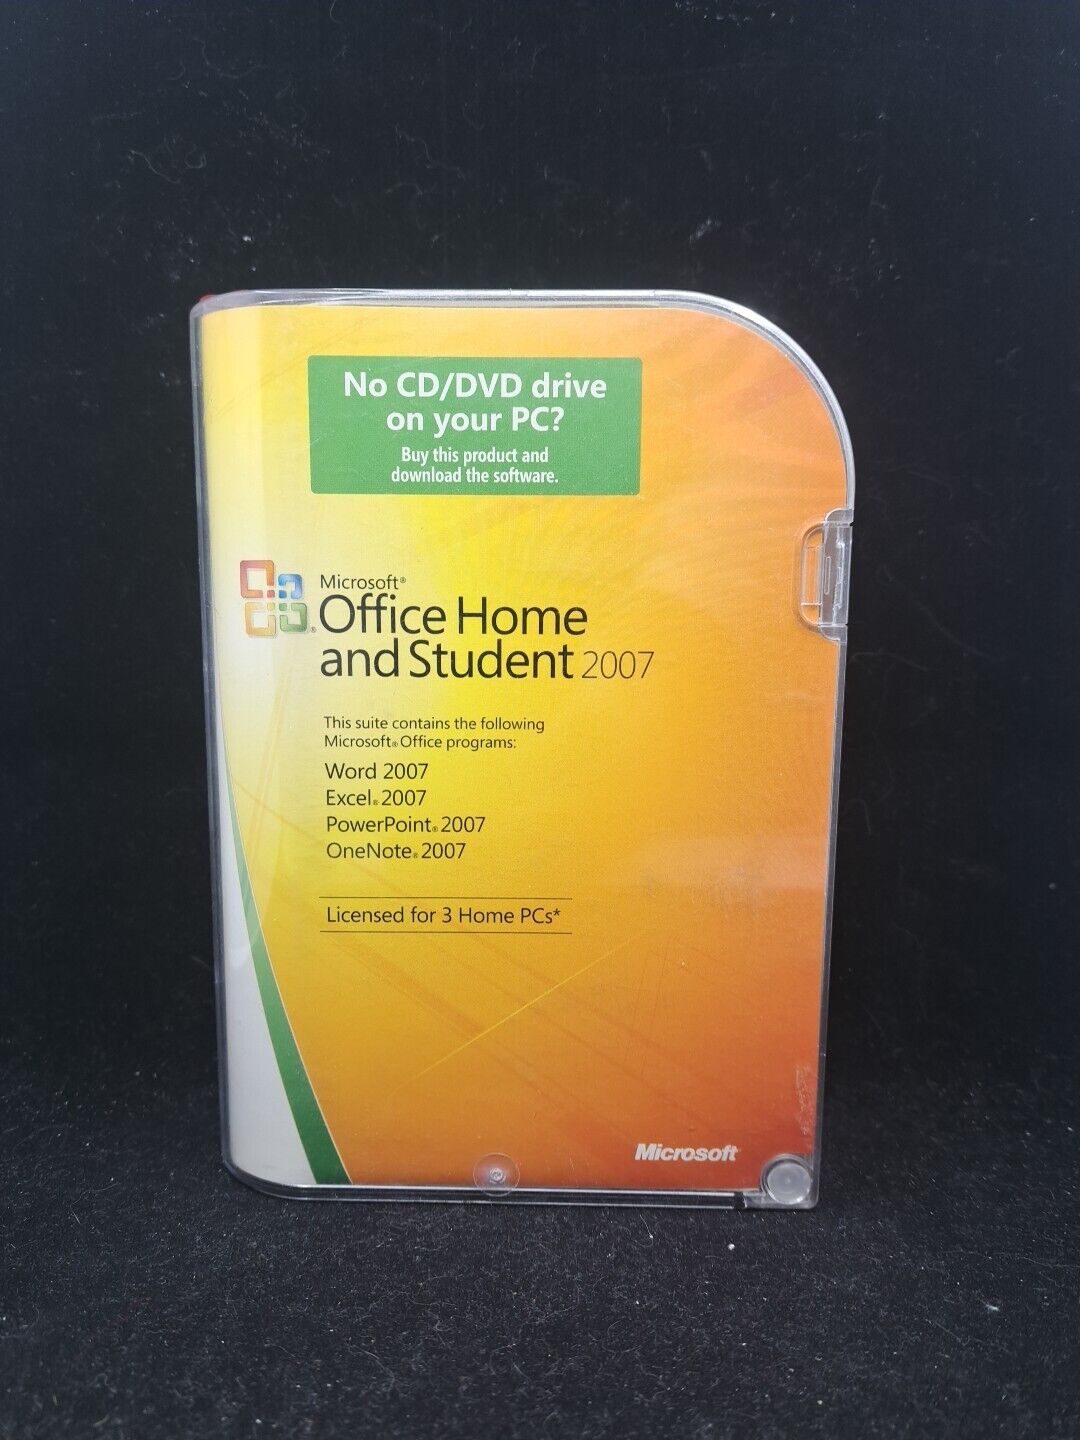 Microsoft Office Home and Student 2007 (79G-00007) w/ Key